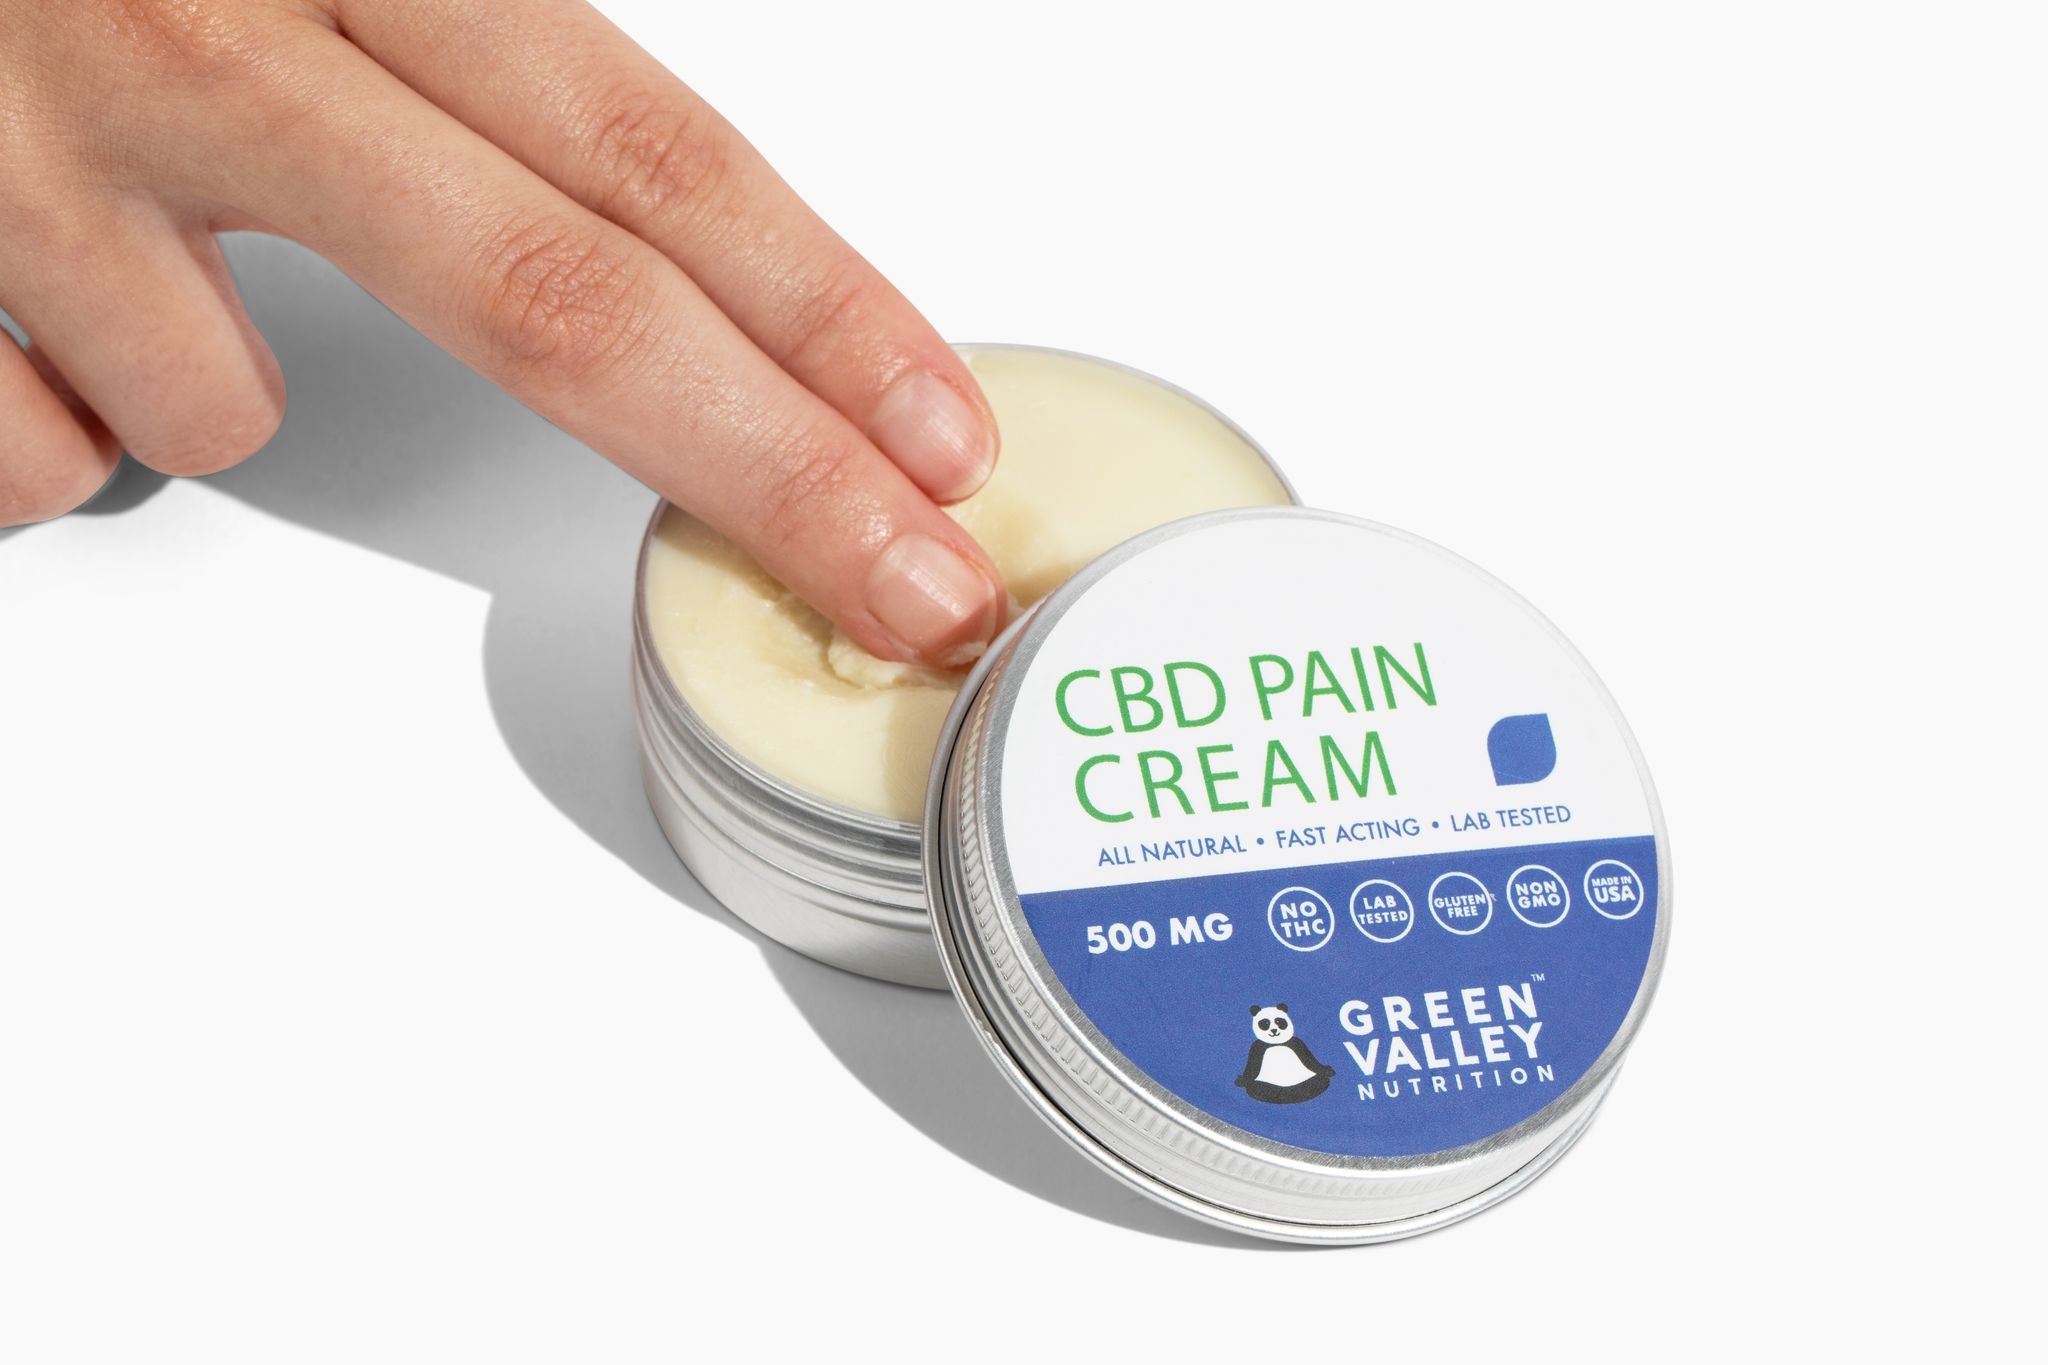 500mg CBD Pain Cream - Feel Better Fast™ with Green Valley 